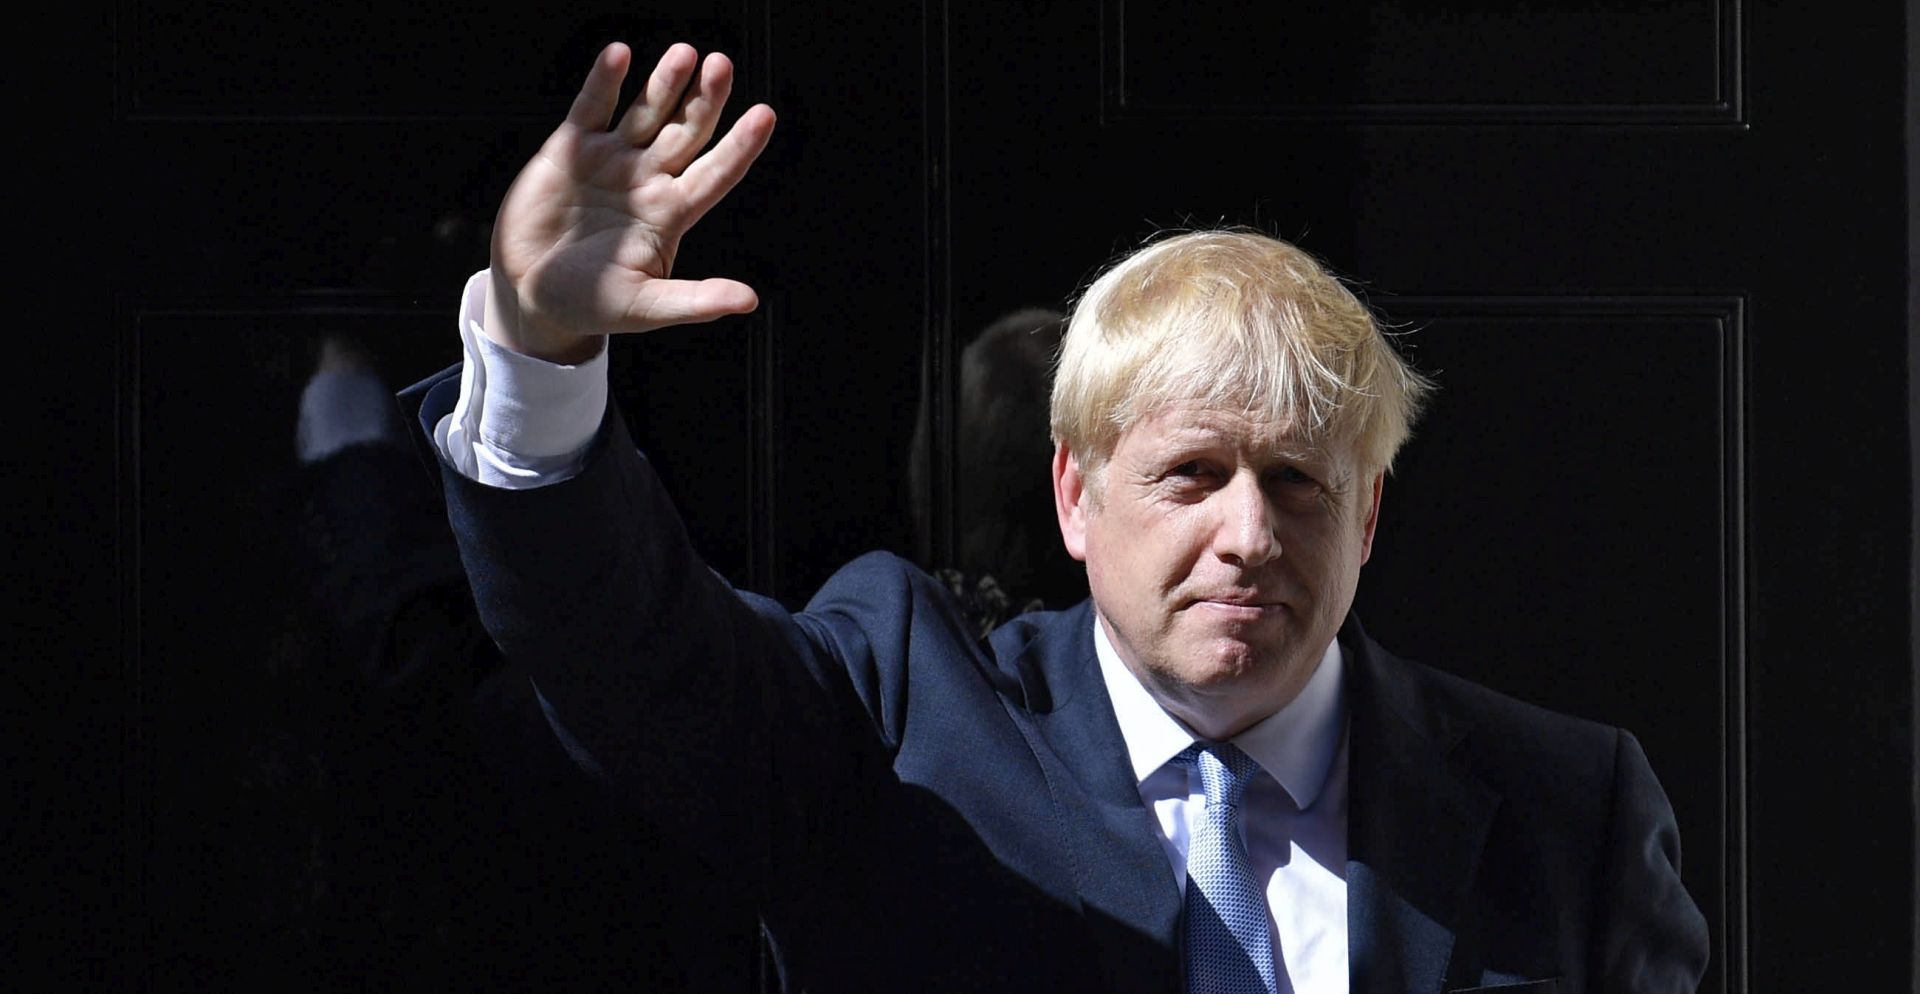 epa07798938 (FILE) - British Prime Minister Boris Johnson waves as he enters 10 Downing Street following his appointment by the Queen in London, Britain, 24 July 2019 (re-issued 28 August 2019). According to reports, British government has formally requested the intervention of the Queen in a bid to suspend parliament. A government source said the government's intention is to suspend parliament and hold a Queen's speech 14 October, setting out the future plans of a post-Brexit government.  EPA/NEIL HALL